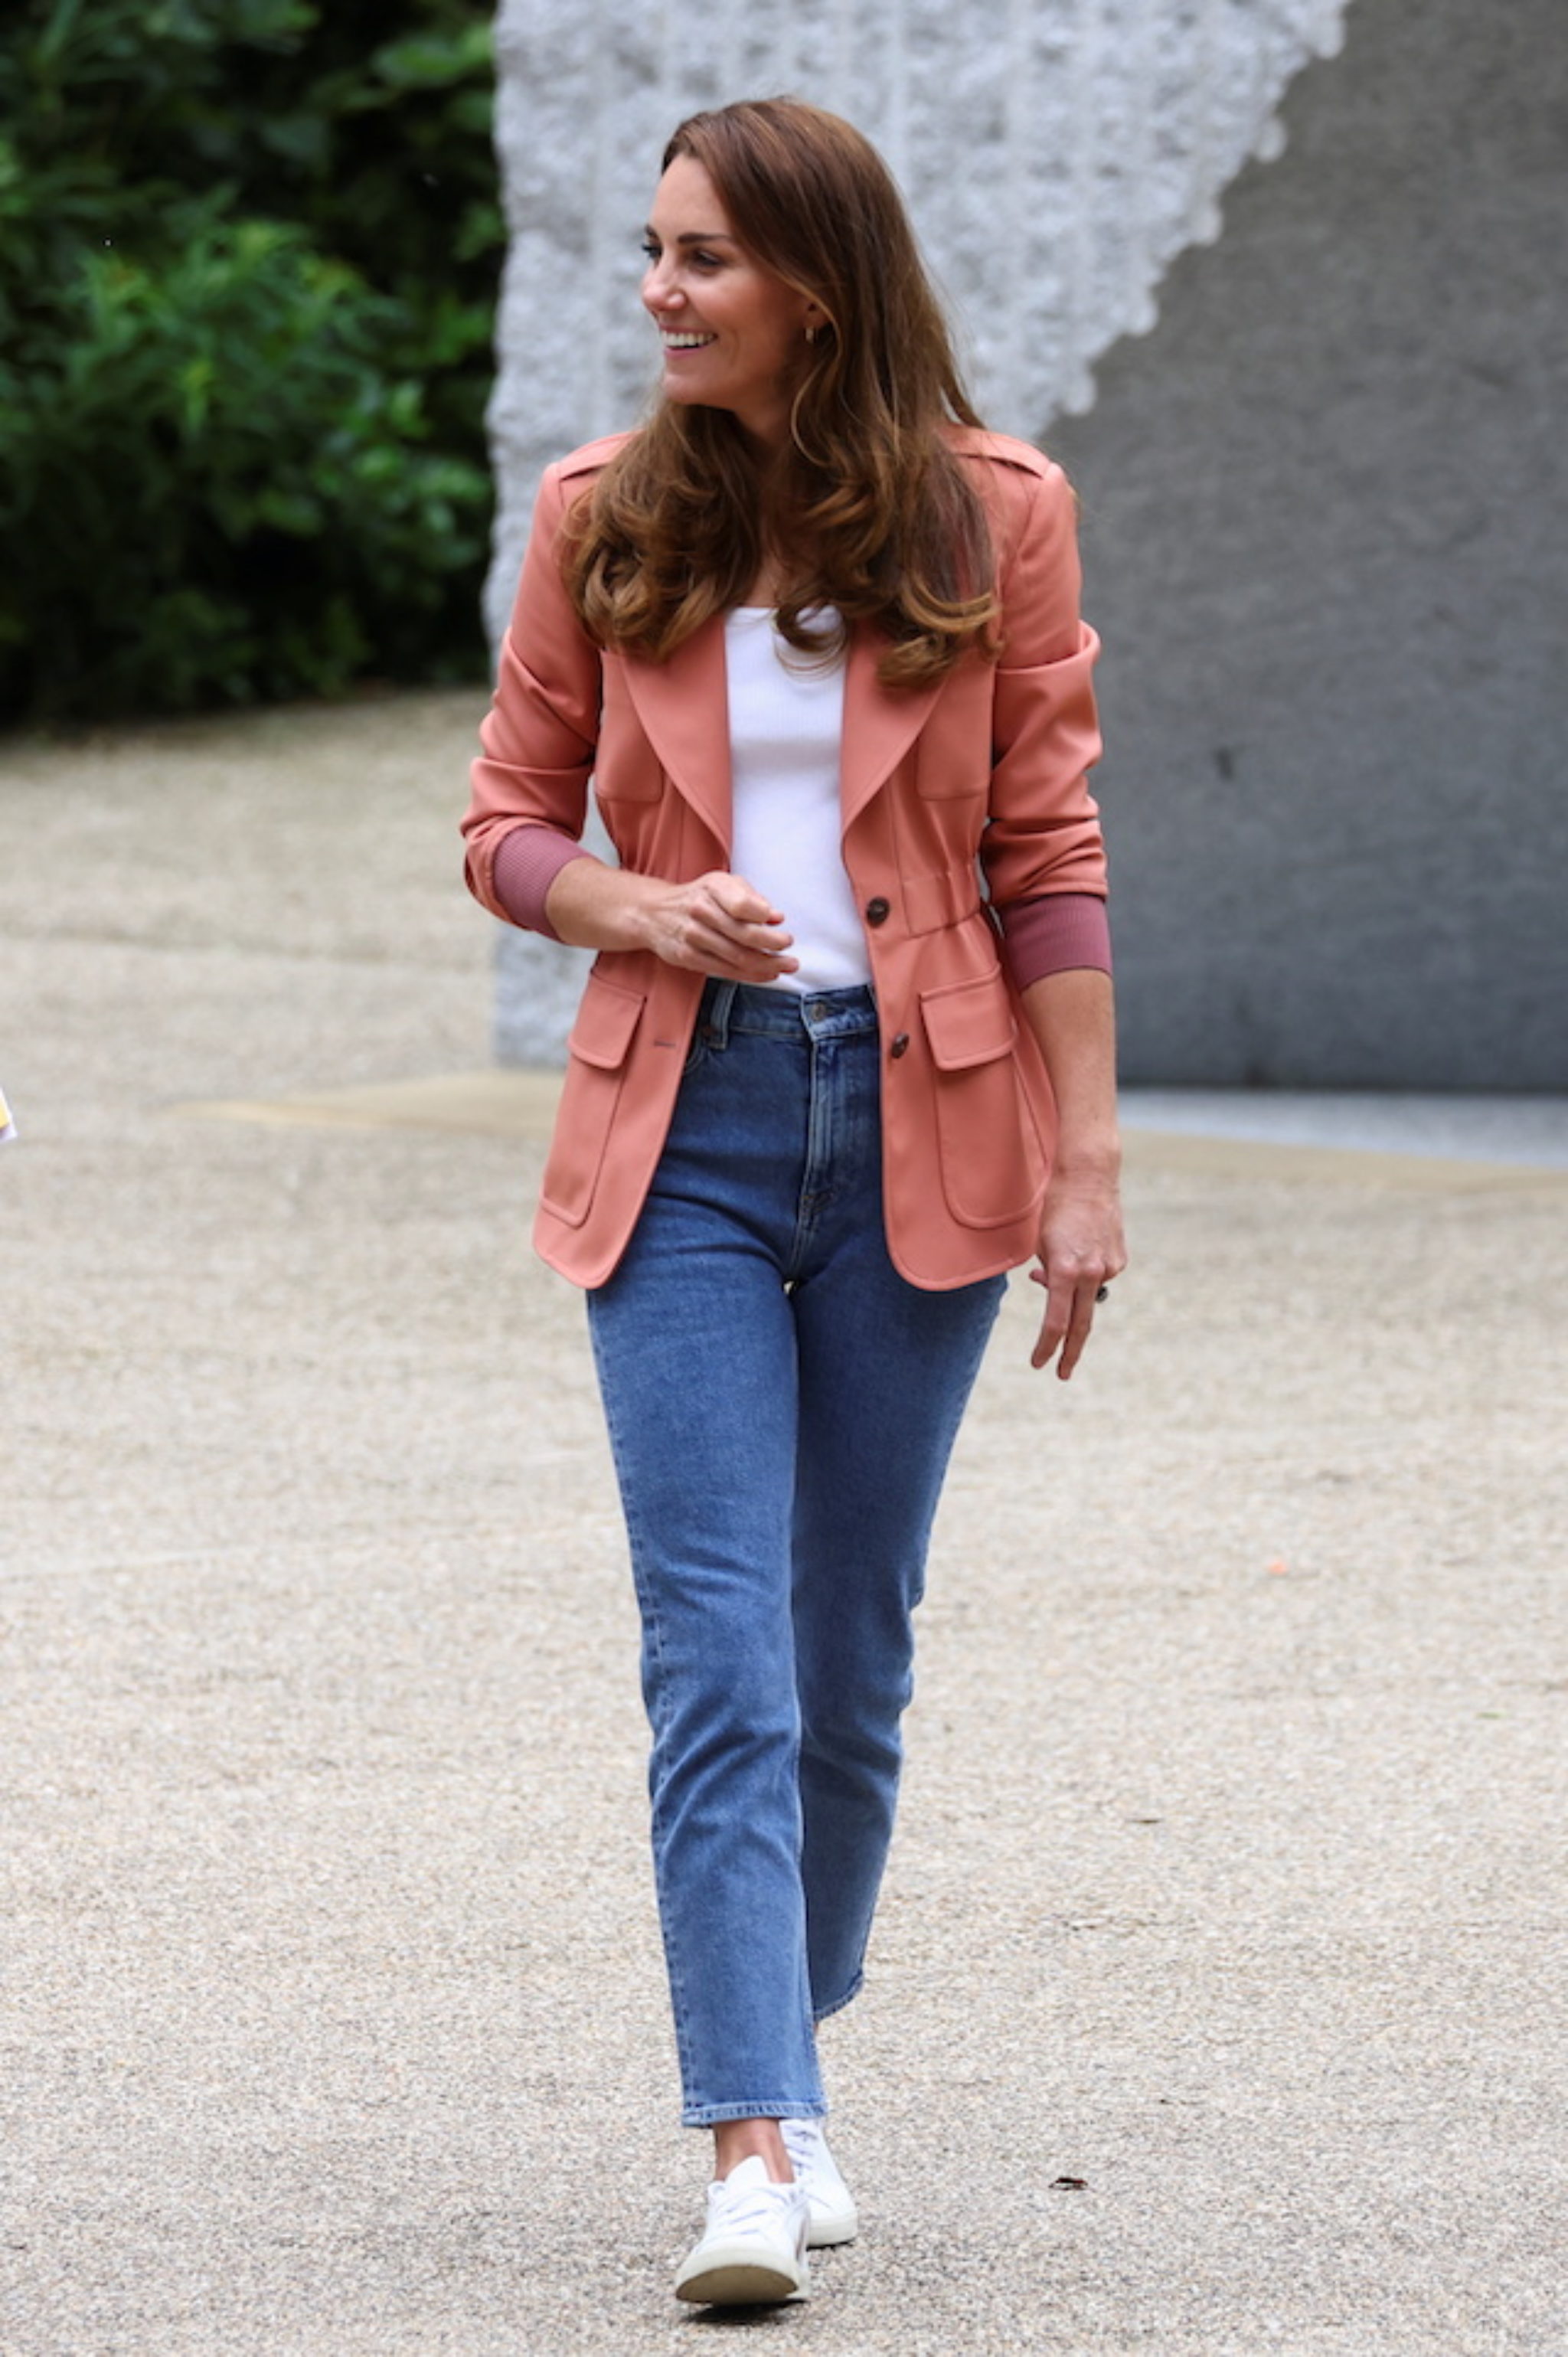 Kate Middleton Wows In Jeans And Rose Blazer Combo For Museum Outing ...